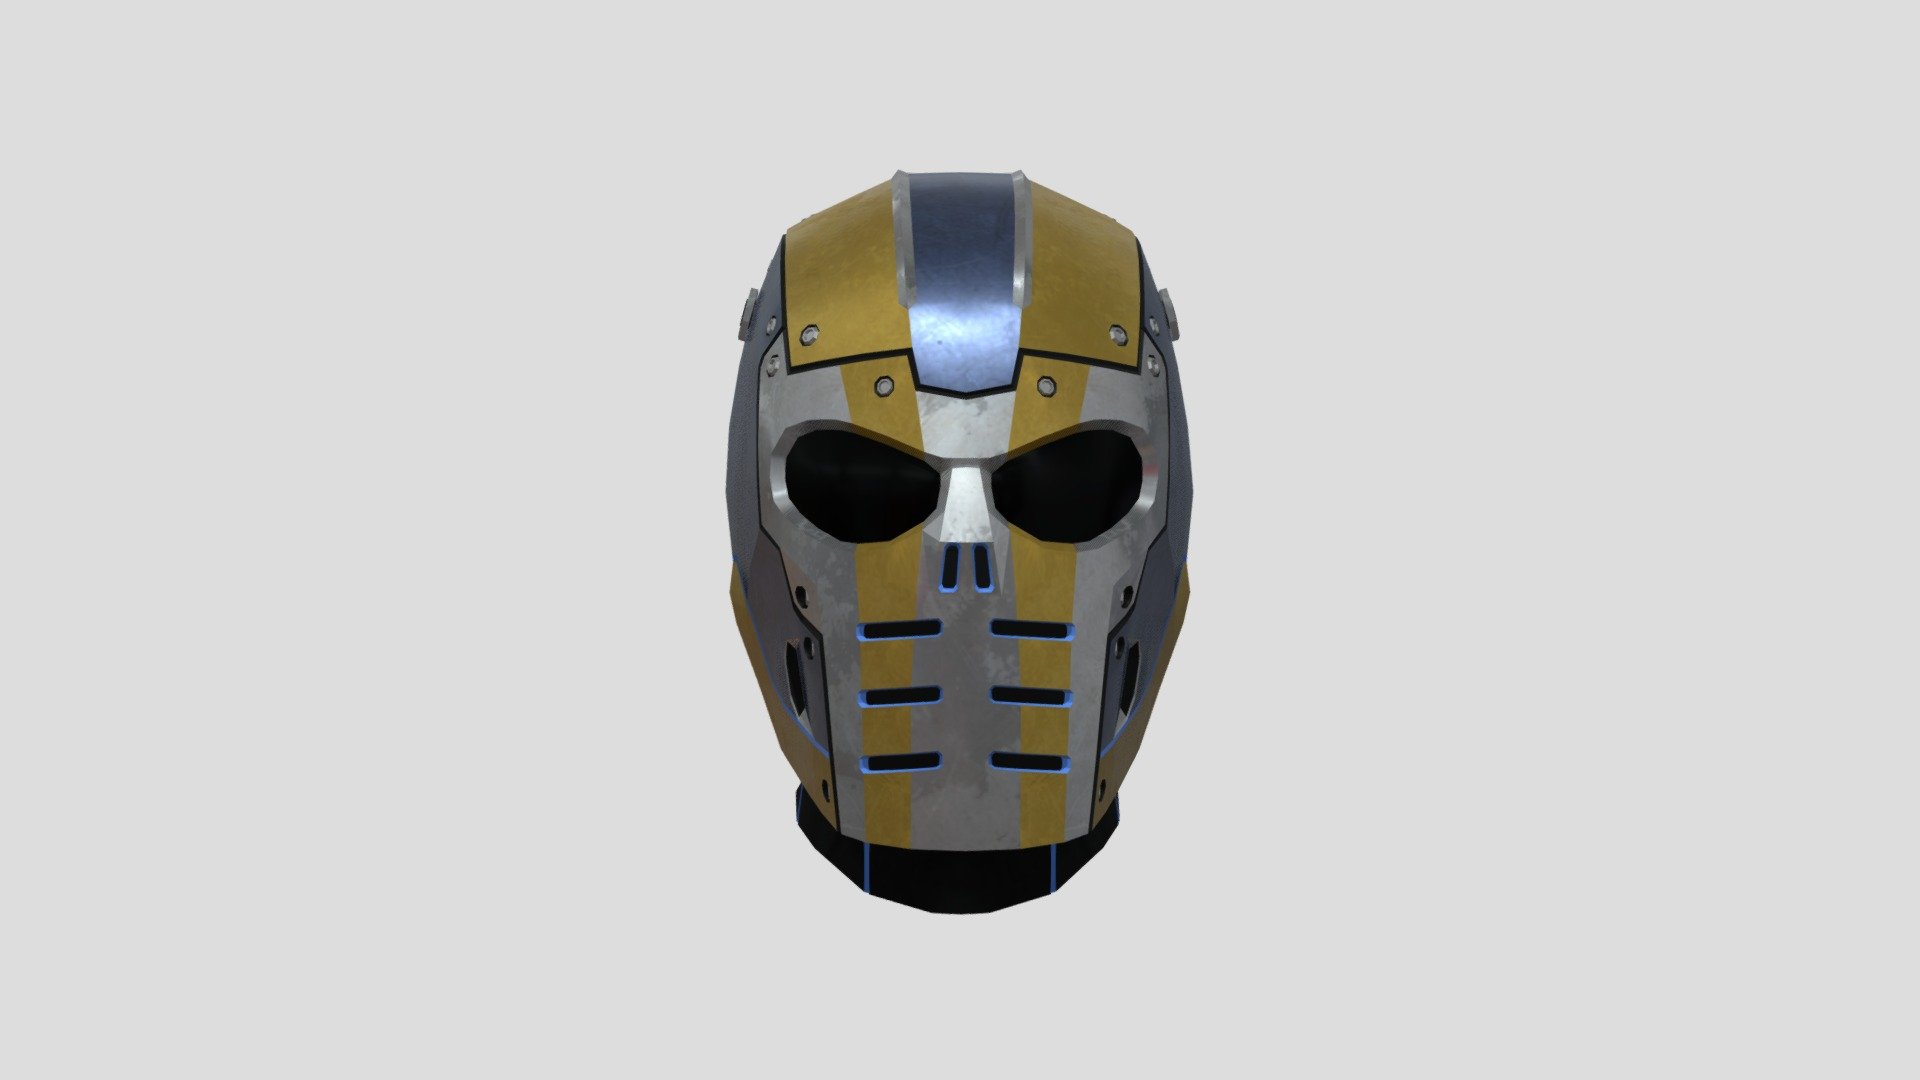 Ballistic Mask for the New Conglomerate in Planetside 2.
Avalible in game now - Planetside 2 Armageddon Mask - 3D model by Jeff Kratzer (G1ngerBoy) (@G1ngerBoy) 3d model